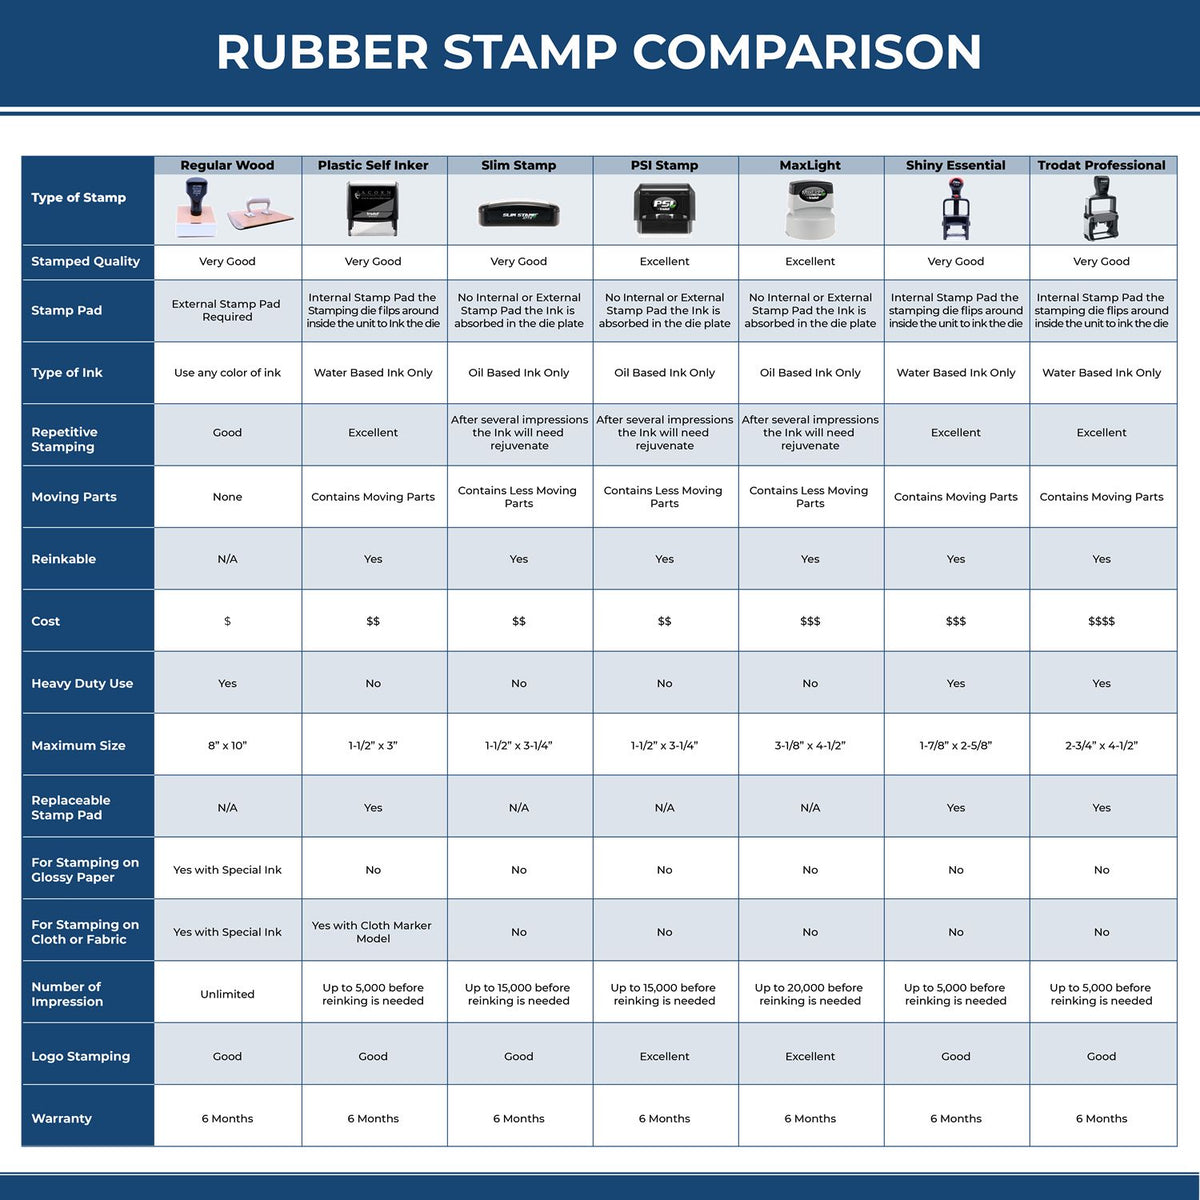 A comparison chart for the different types of mount models available for the Heavy-Duty Maryland Rectangular Notary Stamp.